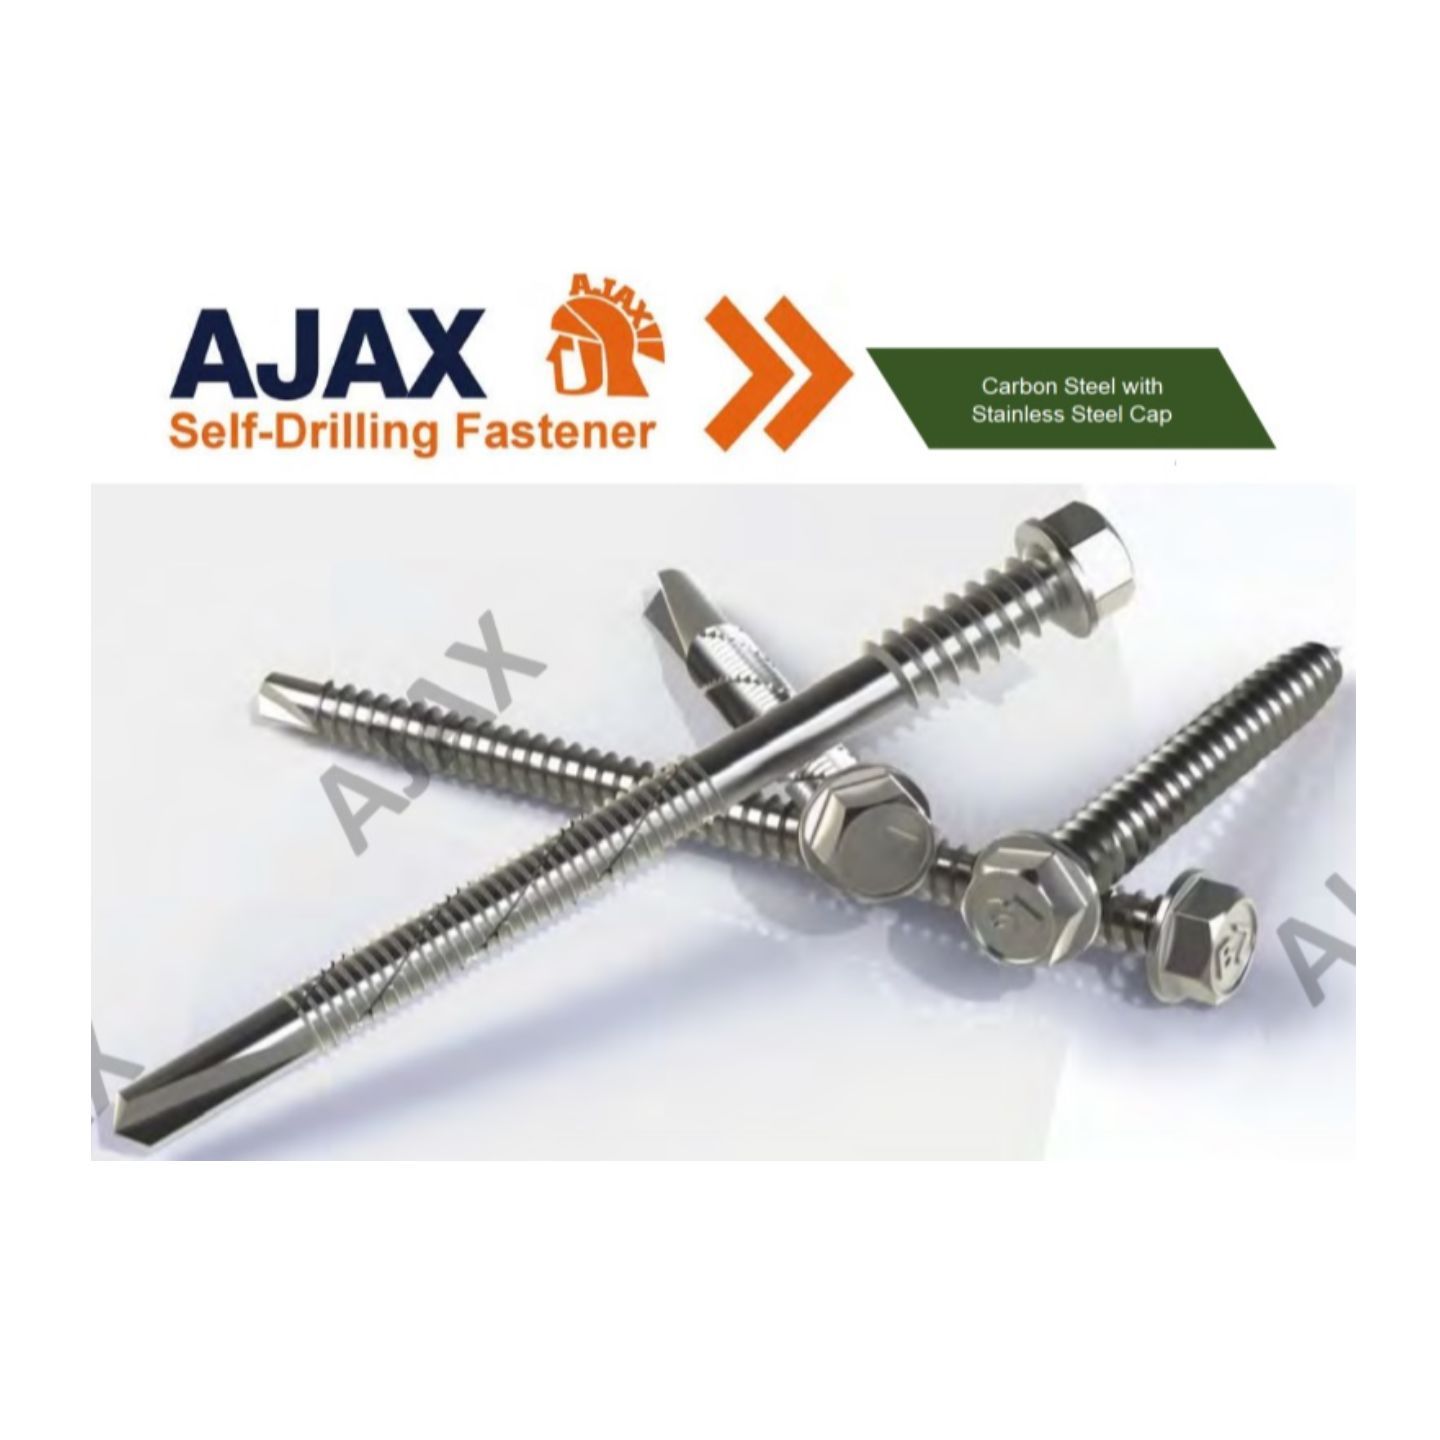 AJAX Carbon Steel with Stainless Steel Cap Self-Drilling Screw (AS3566 CLASS 3) with a unique comformal coating technology